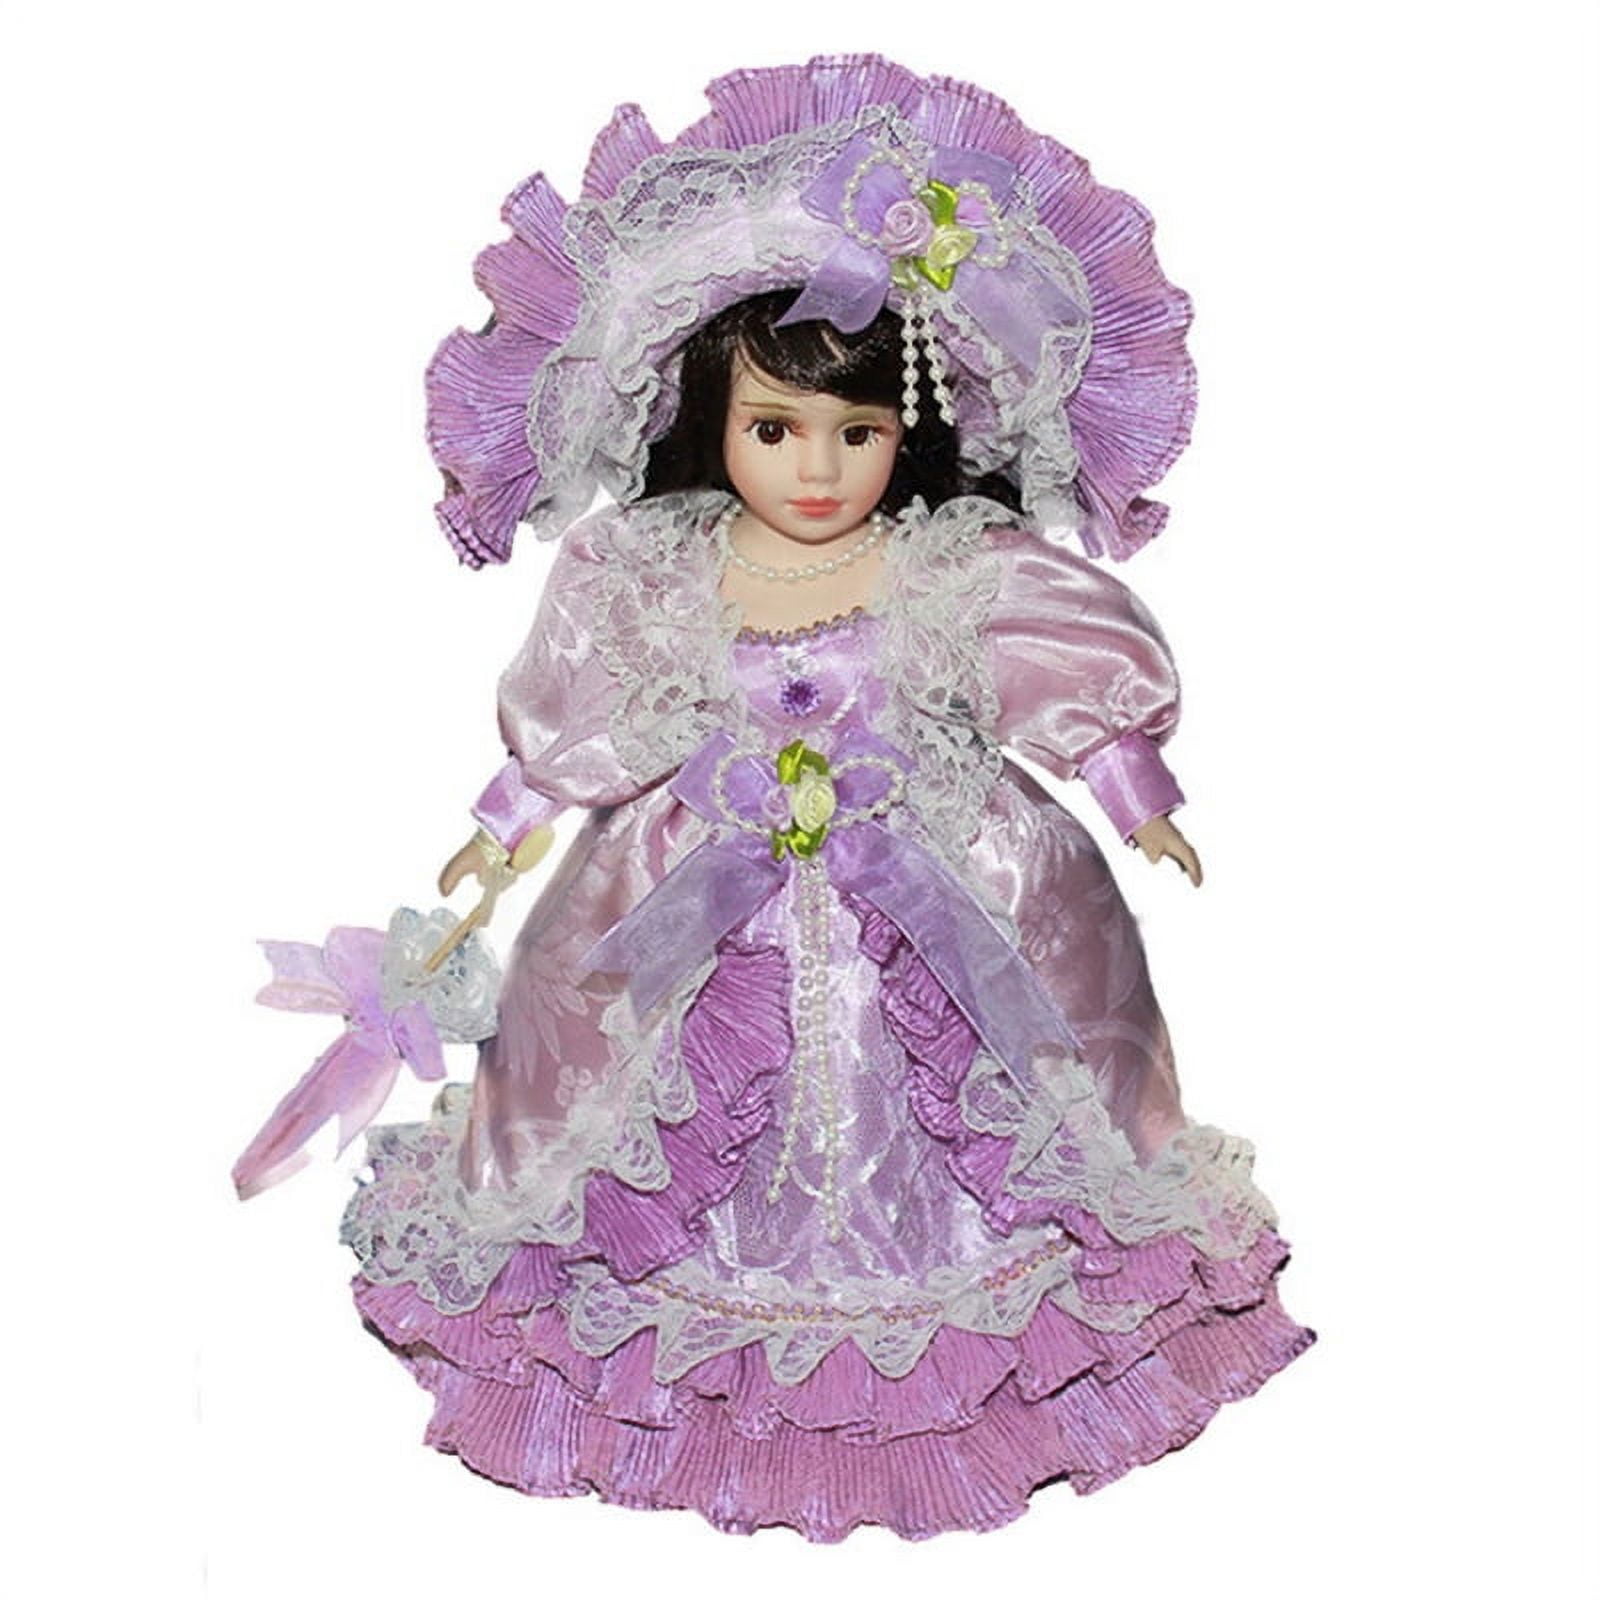 HGYCPP Victorian Porcelain Doll Girls Collectible Ceramics Doll Model W/  Wooden Display